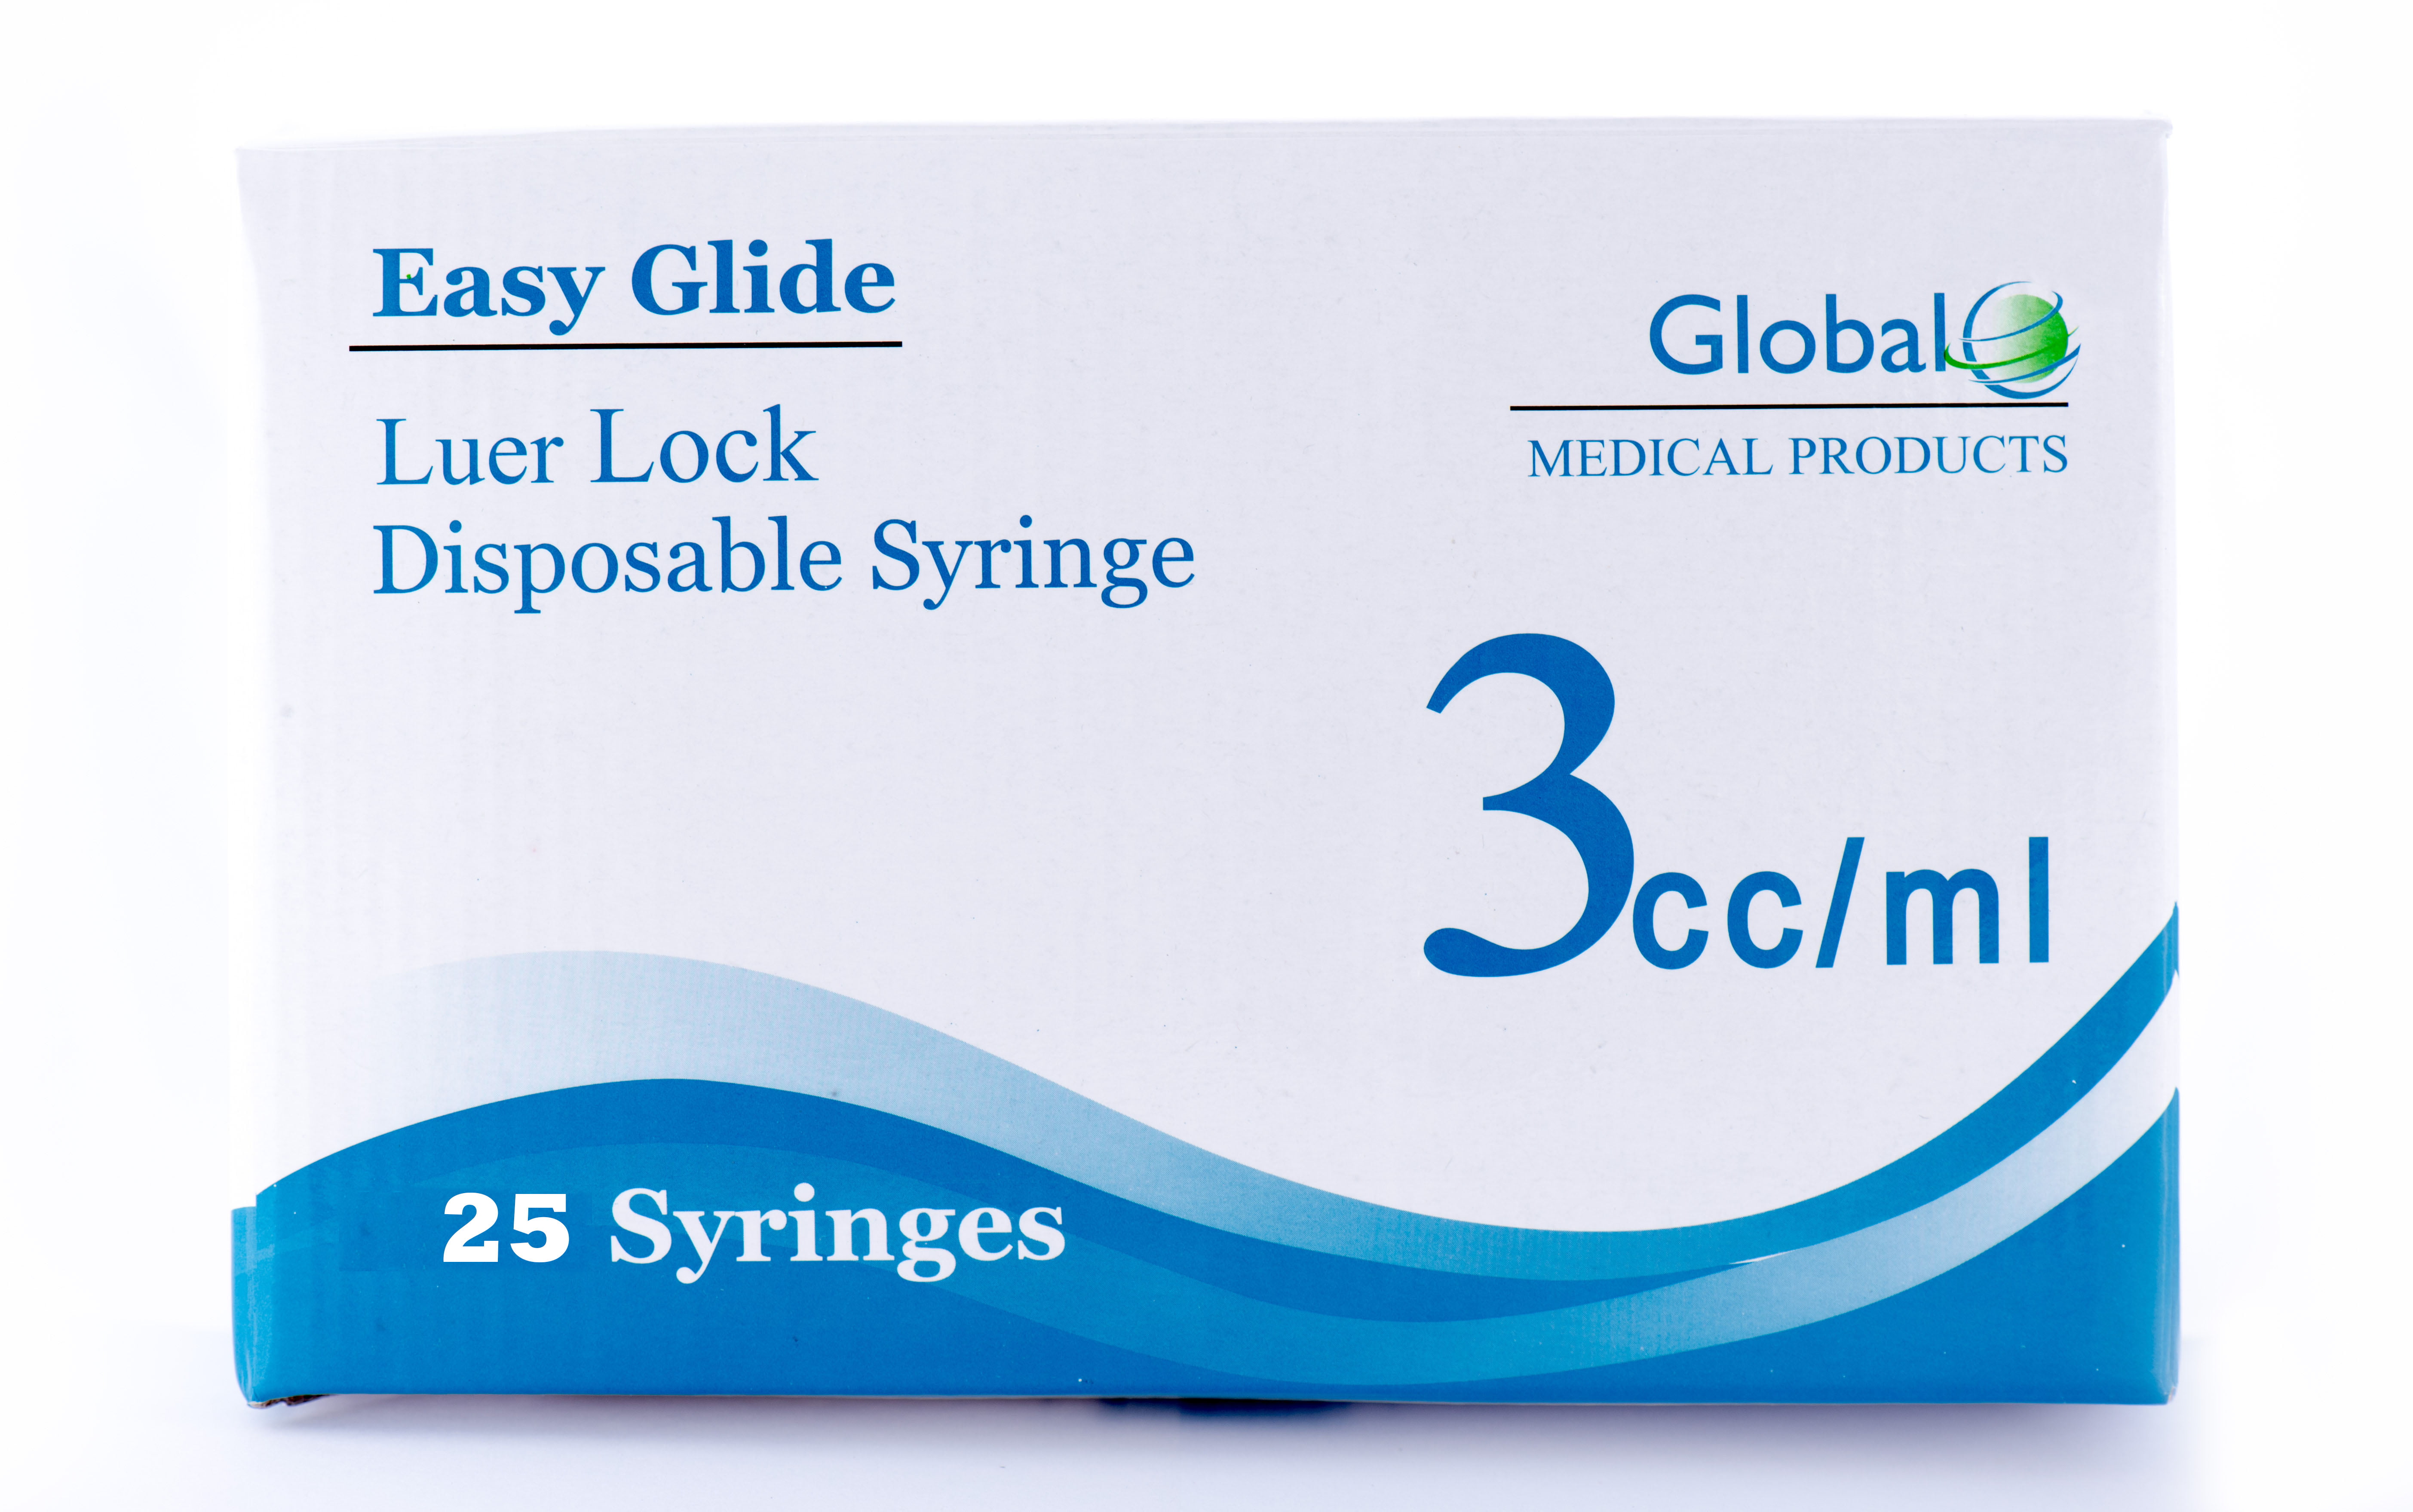 3ML Sterile Syringe Only with Luer Lock Tip - 25 Syringes Without a Needle  by Easy Glide - Great for Medicine, Feeding Tubes, and Home Care